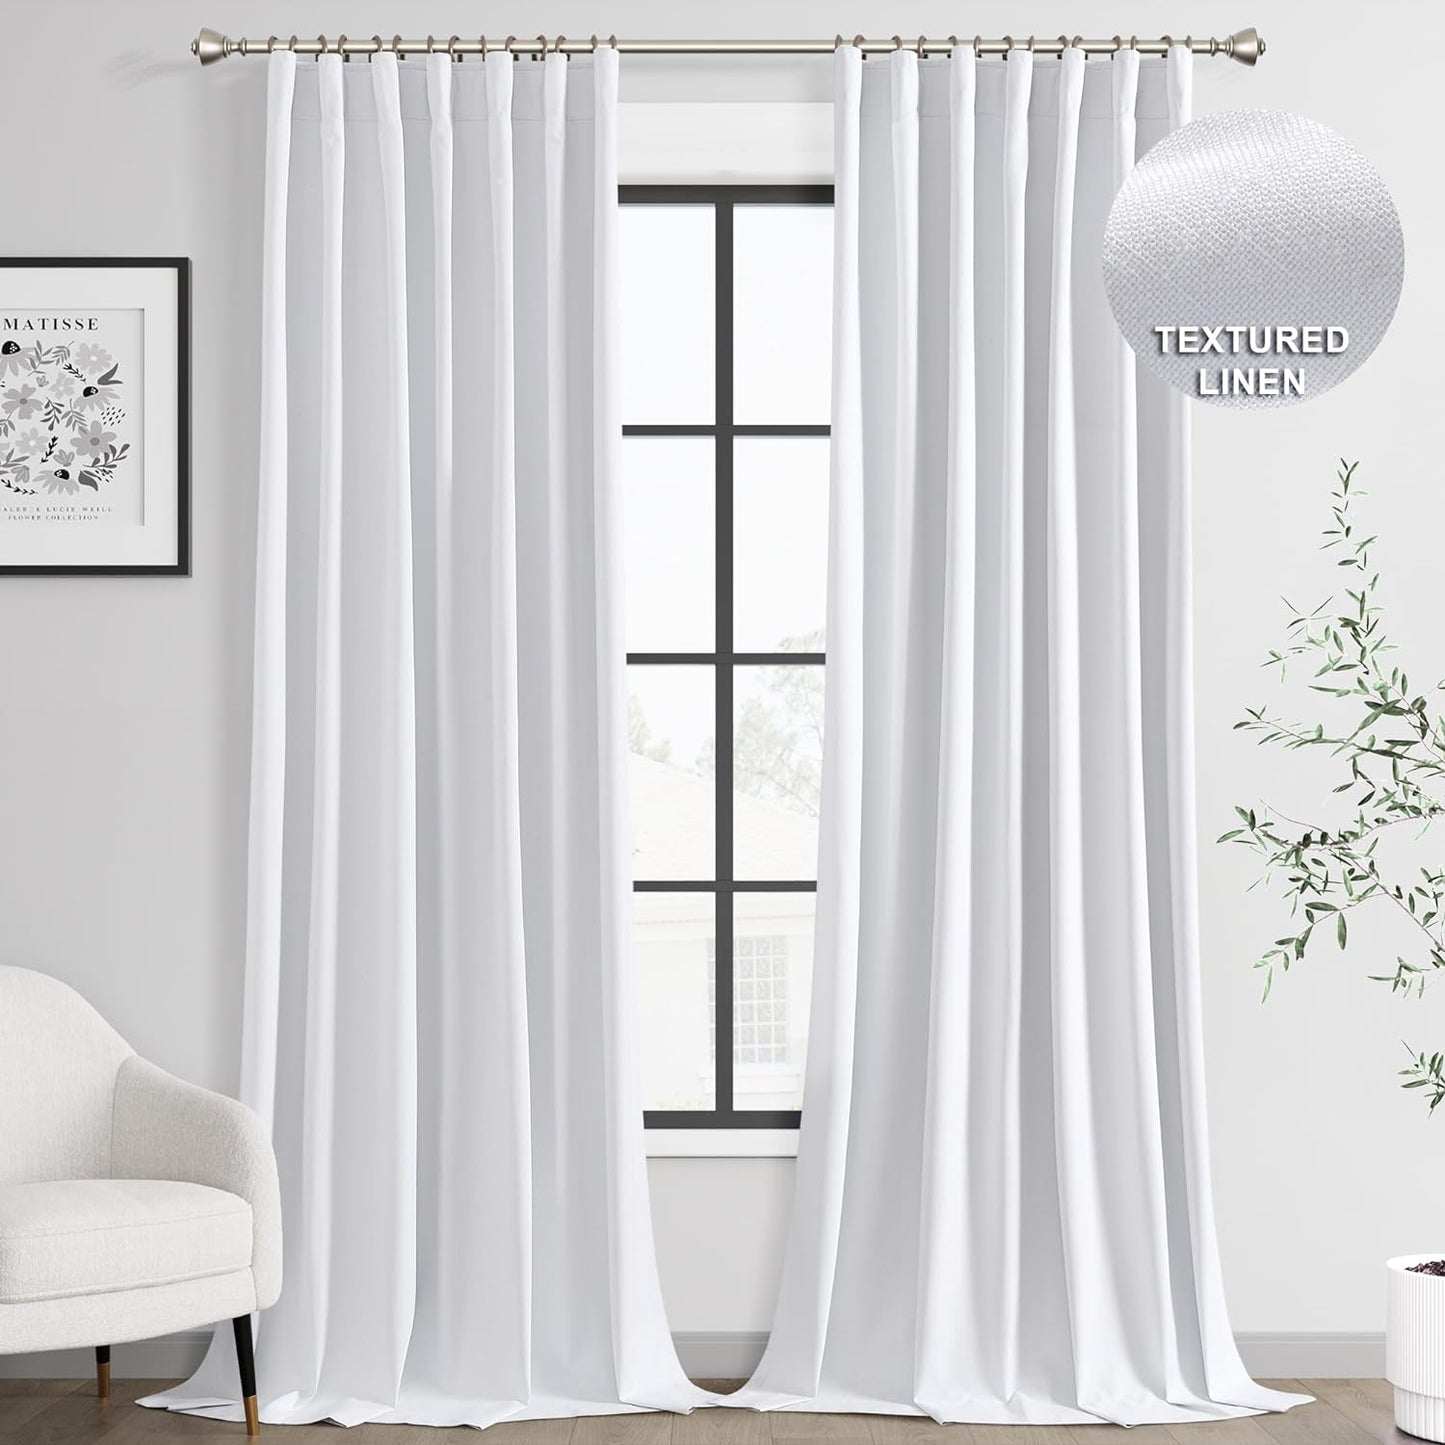 Joywell 100% Blackout Linen Curtains 102 Inches Long, Rod Pocket/Back Tab/Hook Belt/Clip Rings, Thermal Insulated Floor Length Drapes for Bedroom Dining Living Room(2 Panels,W52 X L102,Linen)  Joywell White 52W X 102L Inch X 2 Panels 